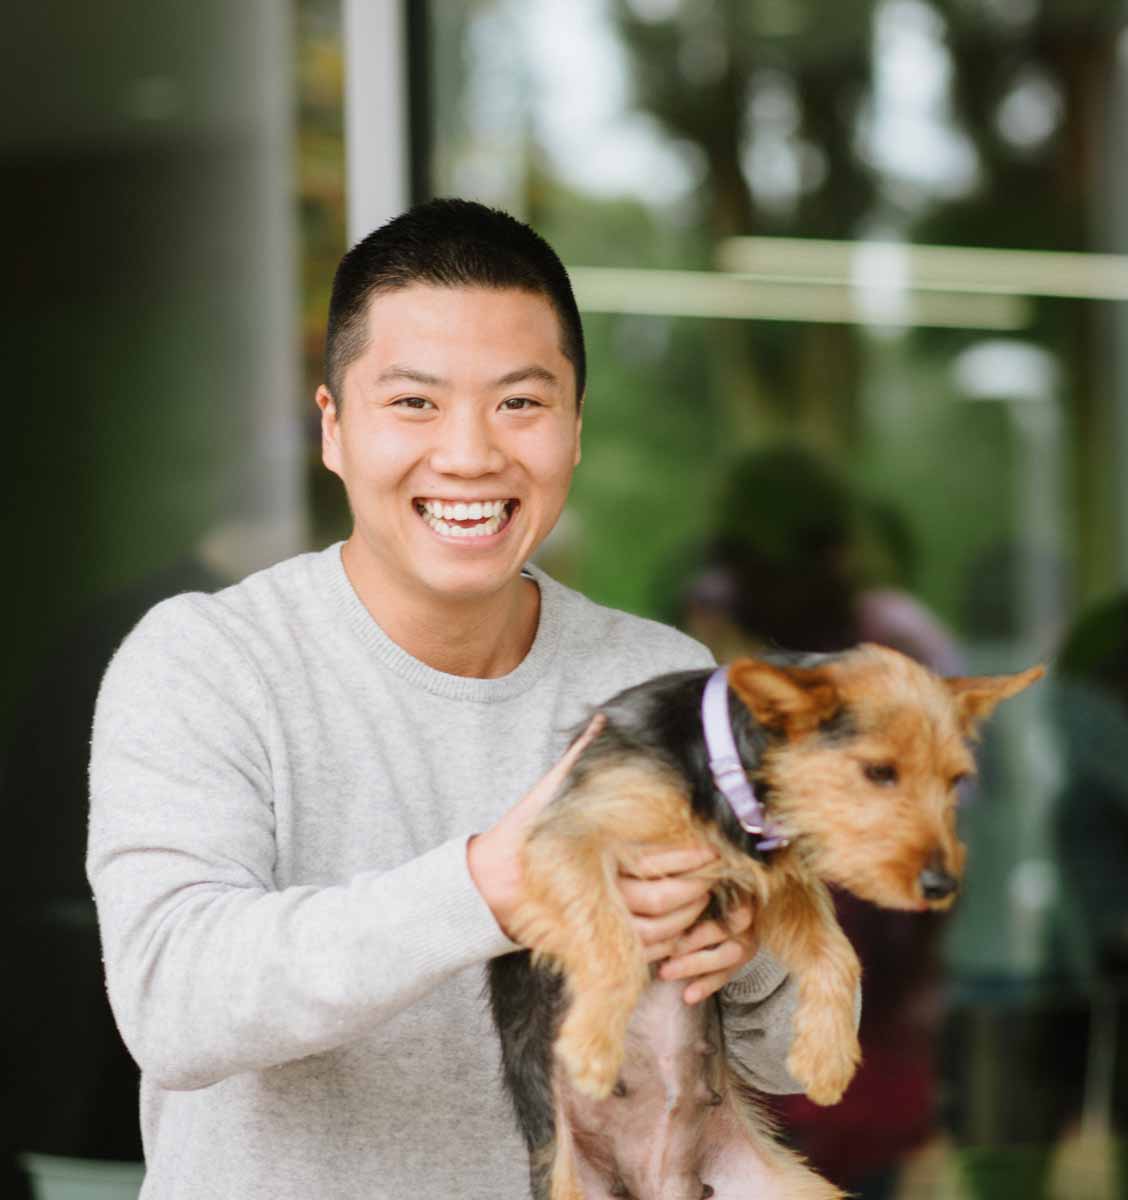 This adorable puppy and employee have fun at a corporate wellness event with Puppy Love!.